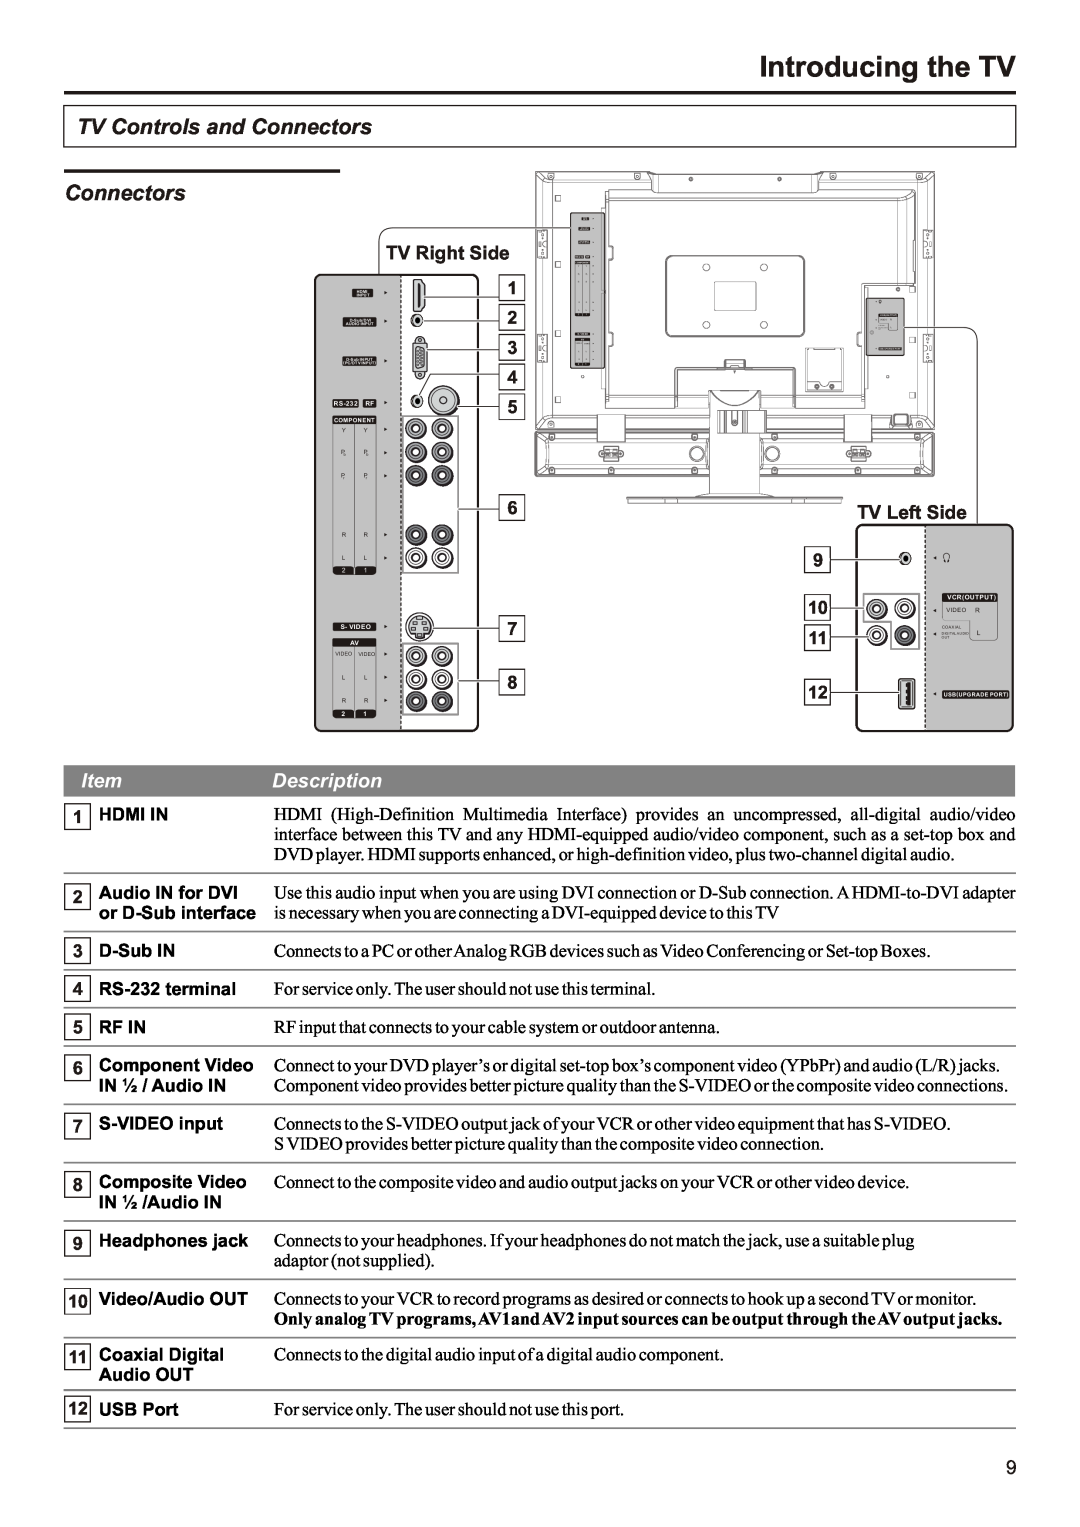 Audiovox FPE3207 operation manual Introducing the TV, TV Controls and Connectors, Description, TV Right Side 